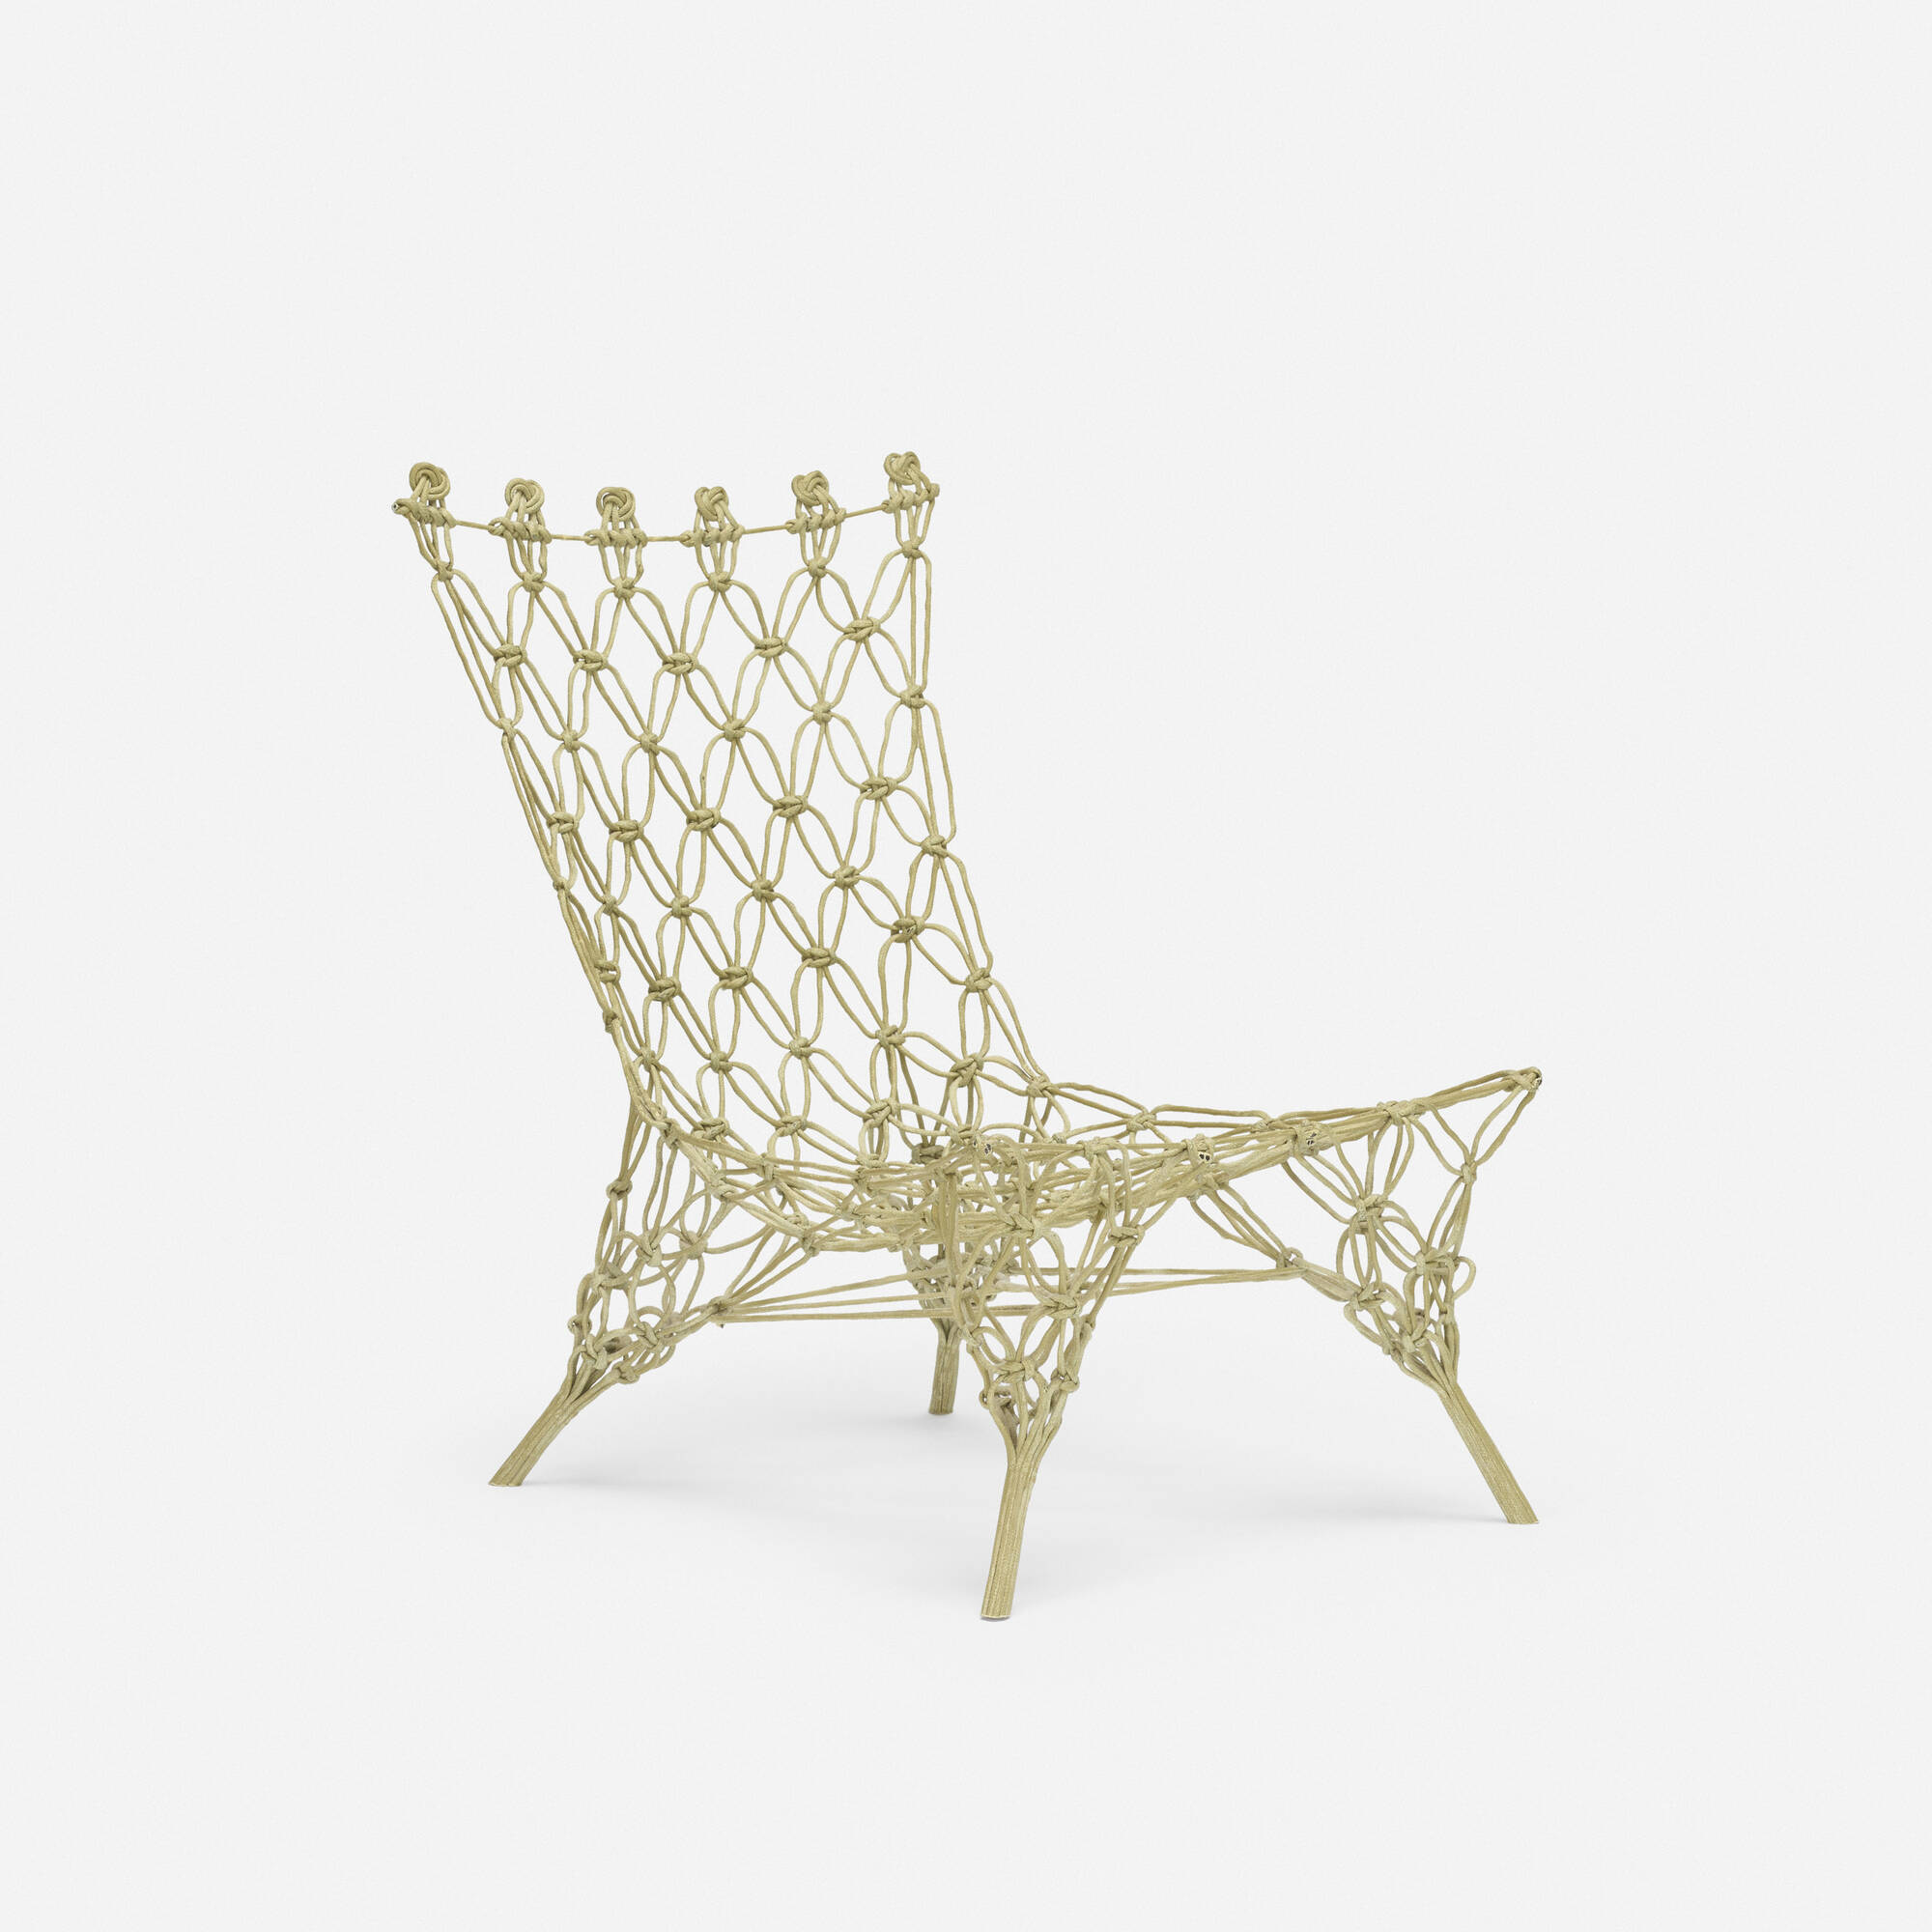 Knotted Chair - Marcel Wanders